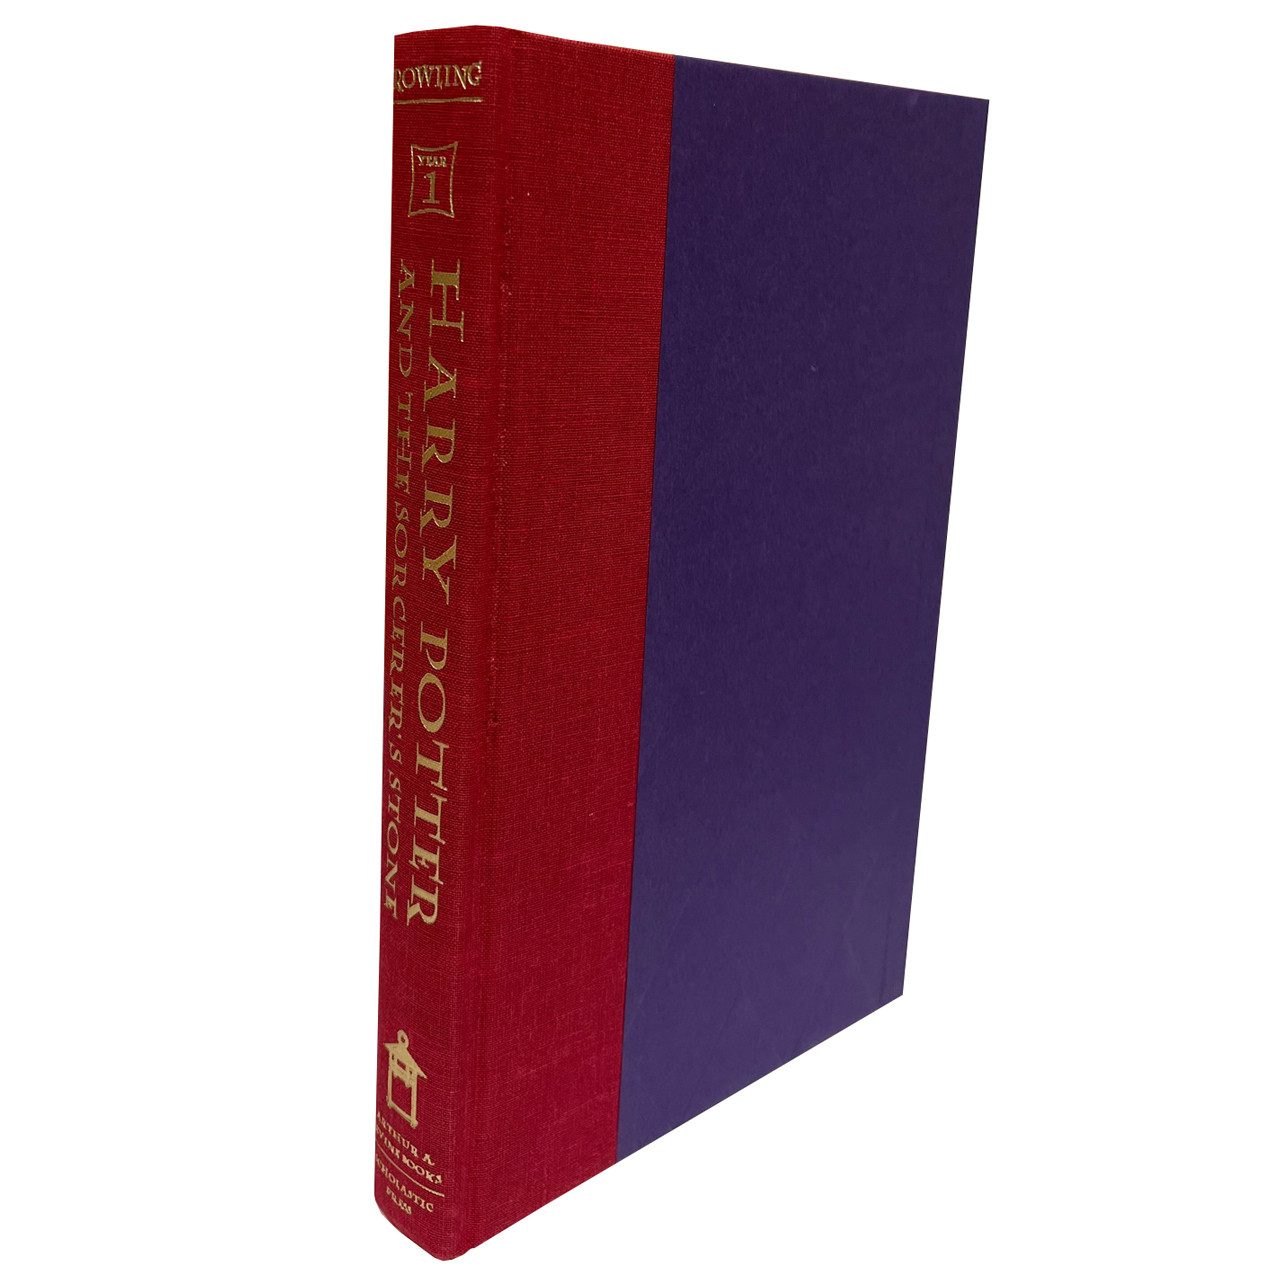 J.K. Rowling "Harry Potter and the Sorcerer's Stone" Traycased Signed First Edition/Later Printing W/COA , Provenance from Book Signing Event [Fine/Fine]